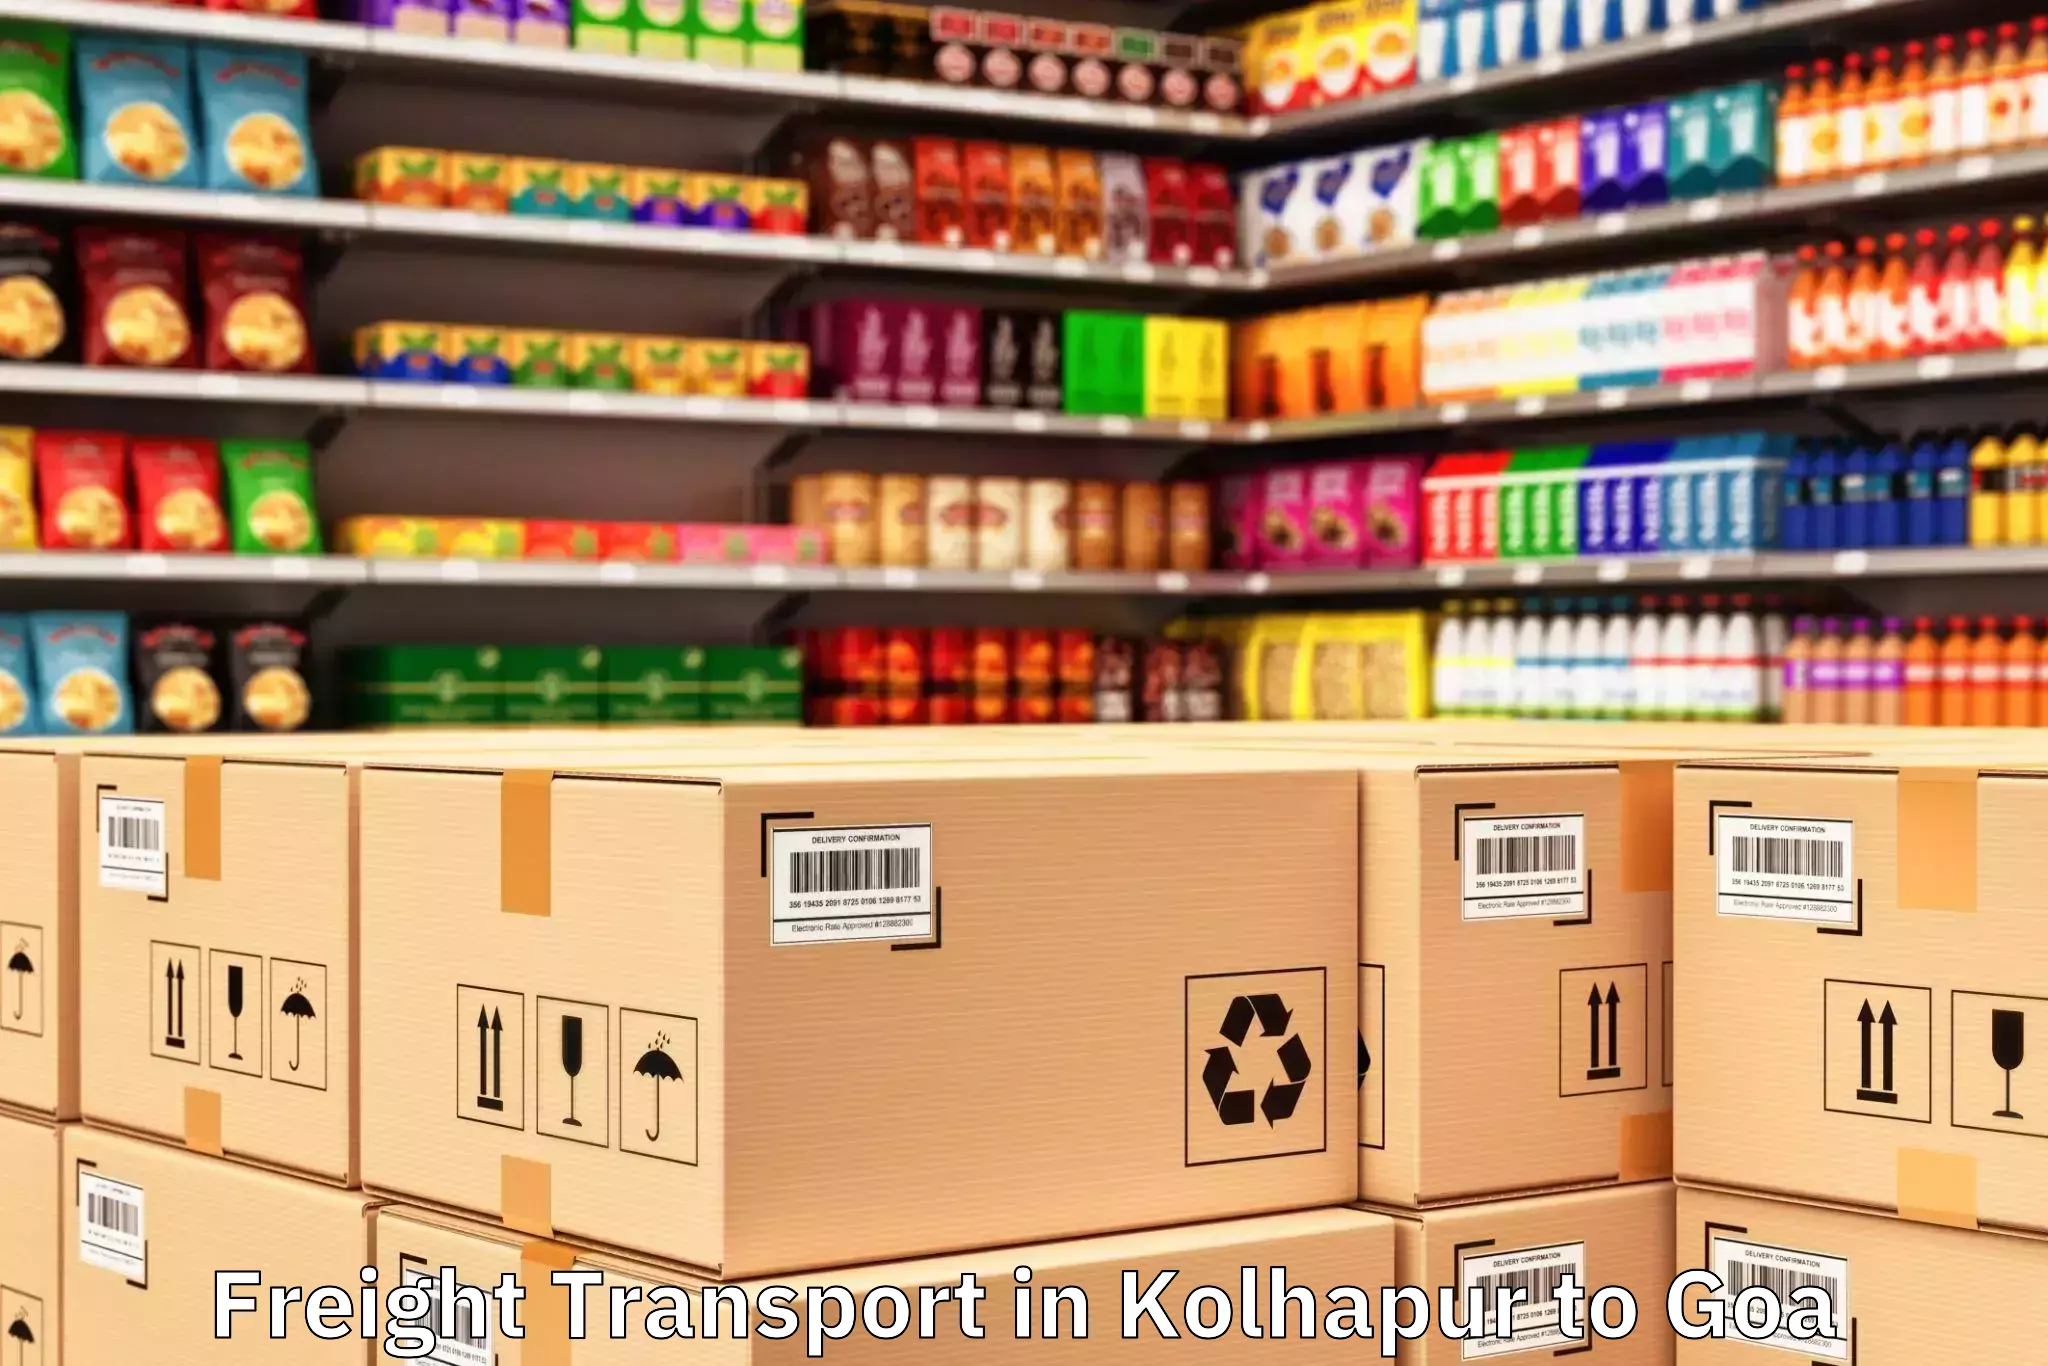 Top Kolhapur to Goa Freight Transport Available